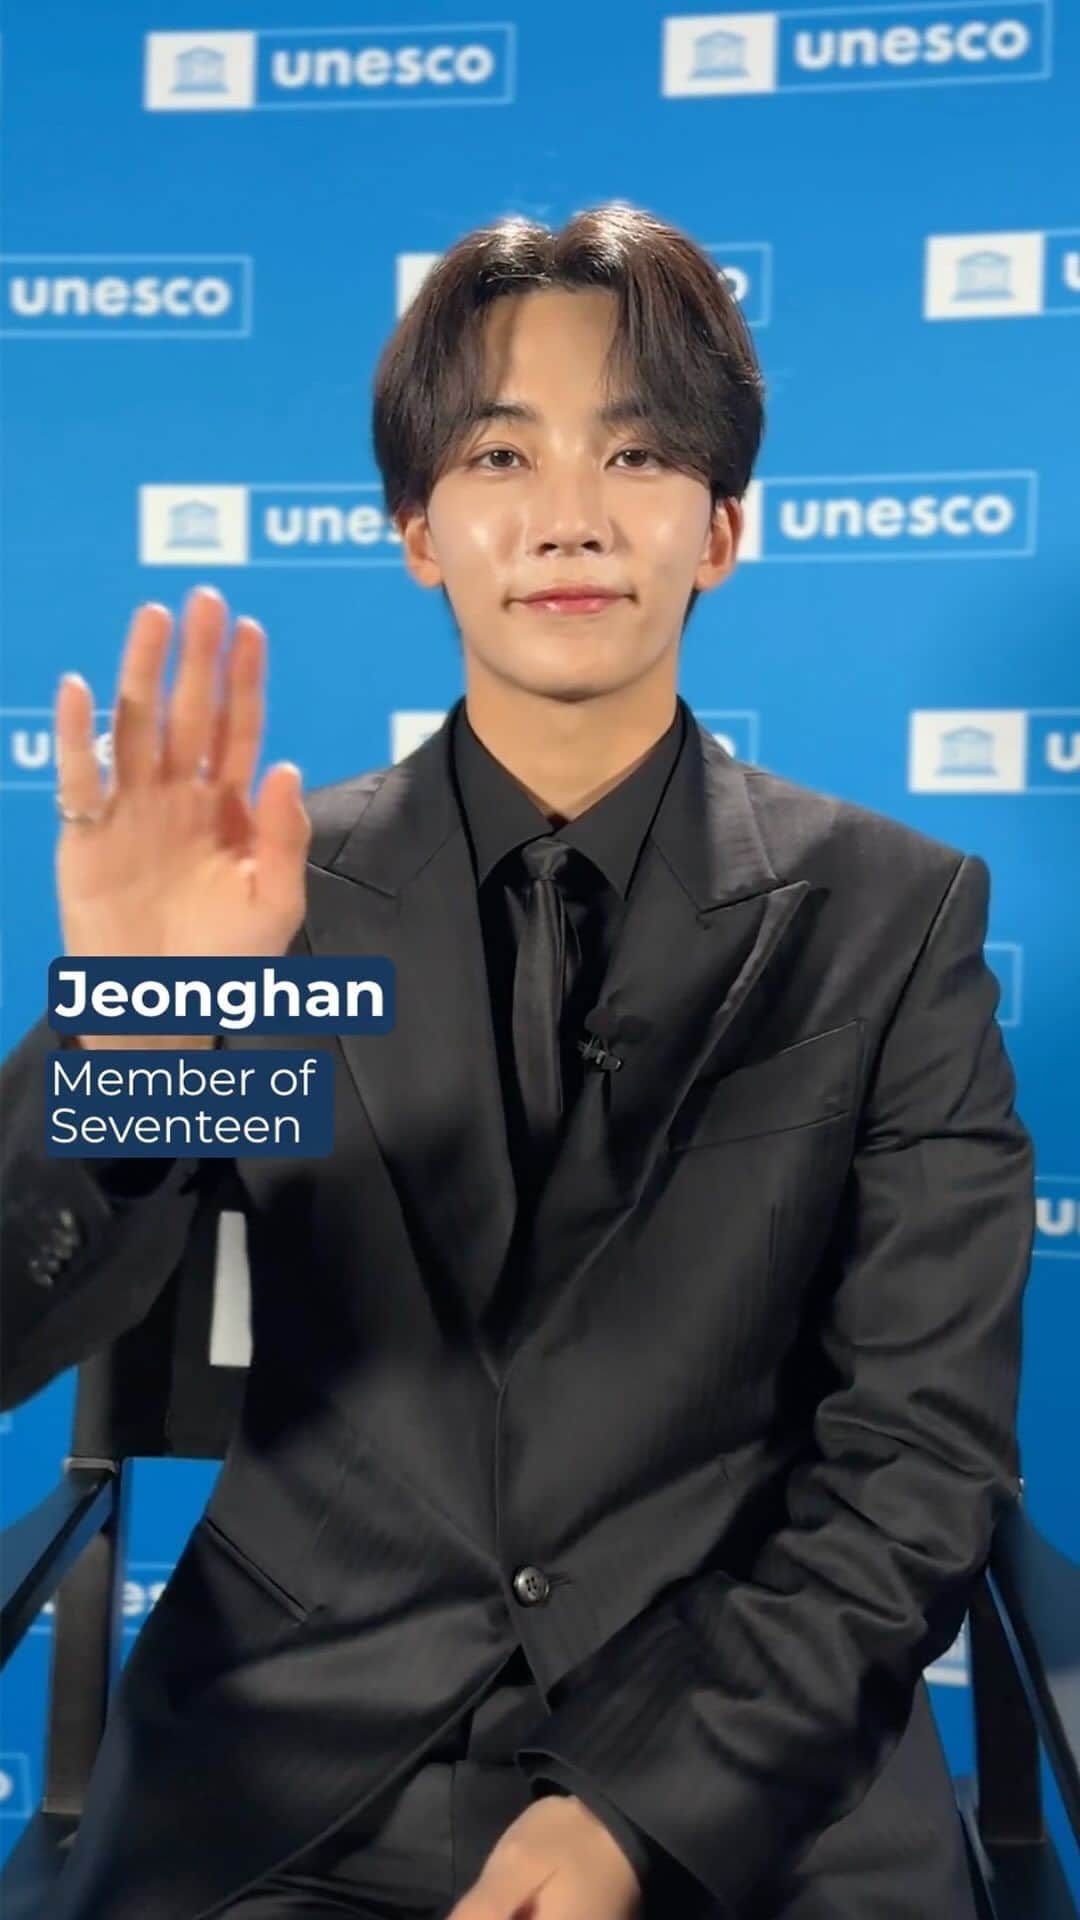 SEVENTEENのインスタグラム：「Never be too discouraged about your dreams, and always feel free to express your thoughts in your own ways.  Listen to Jeonghan’s(@jeonghaniyoo_n) message, a member of SEVENTEEN, during his participation at the UNESCO Youth Forum.  #SEVENTEEN #UNESCO #SharingHumanity」